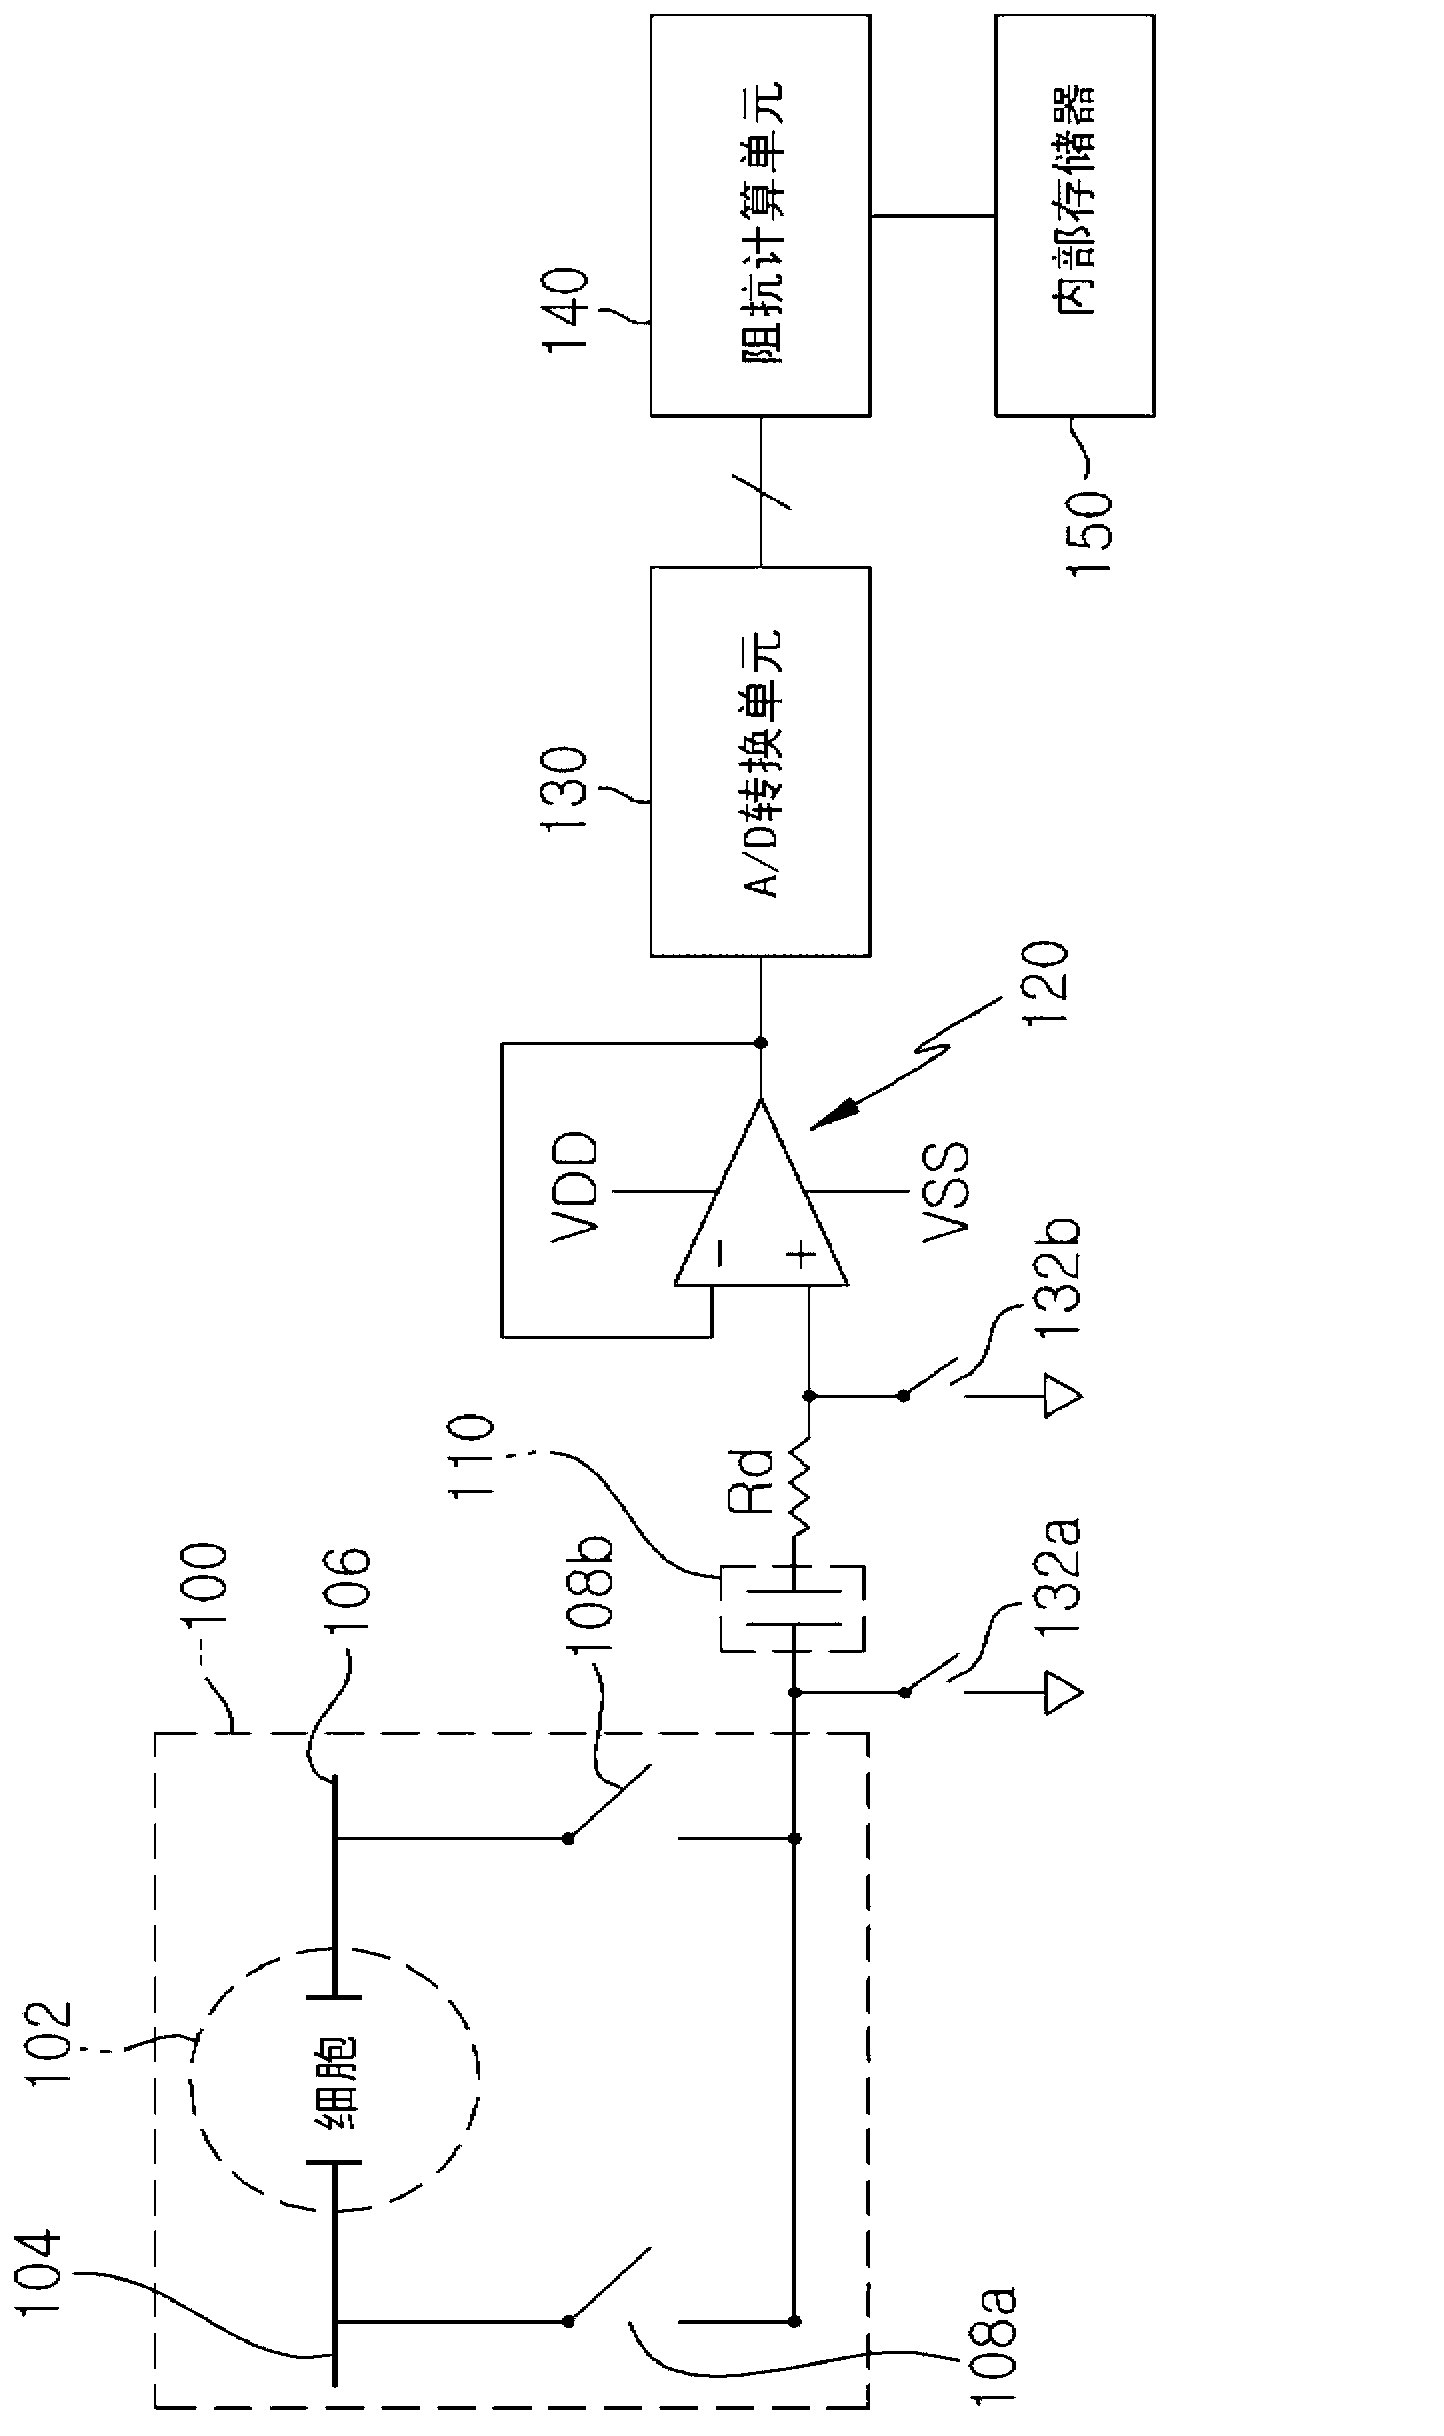 Apparatus for measuring interfacial impedance between the body and a simulating electrode